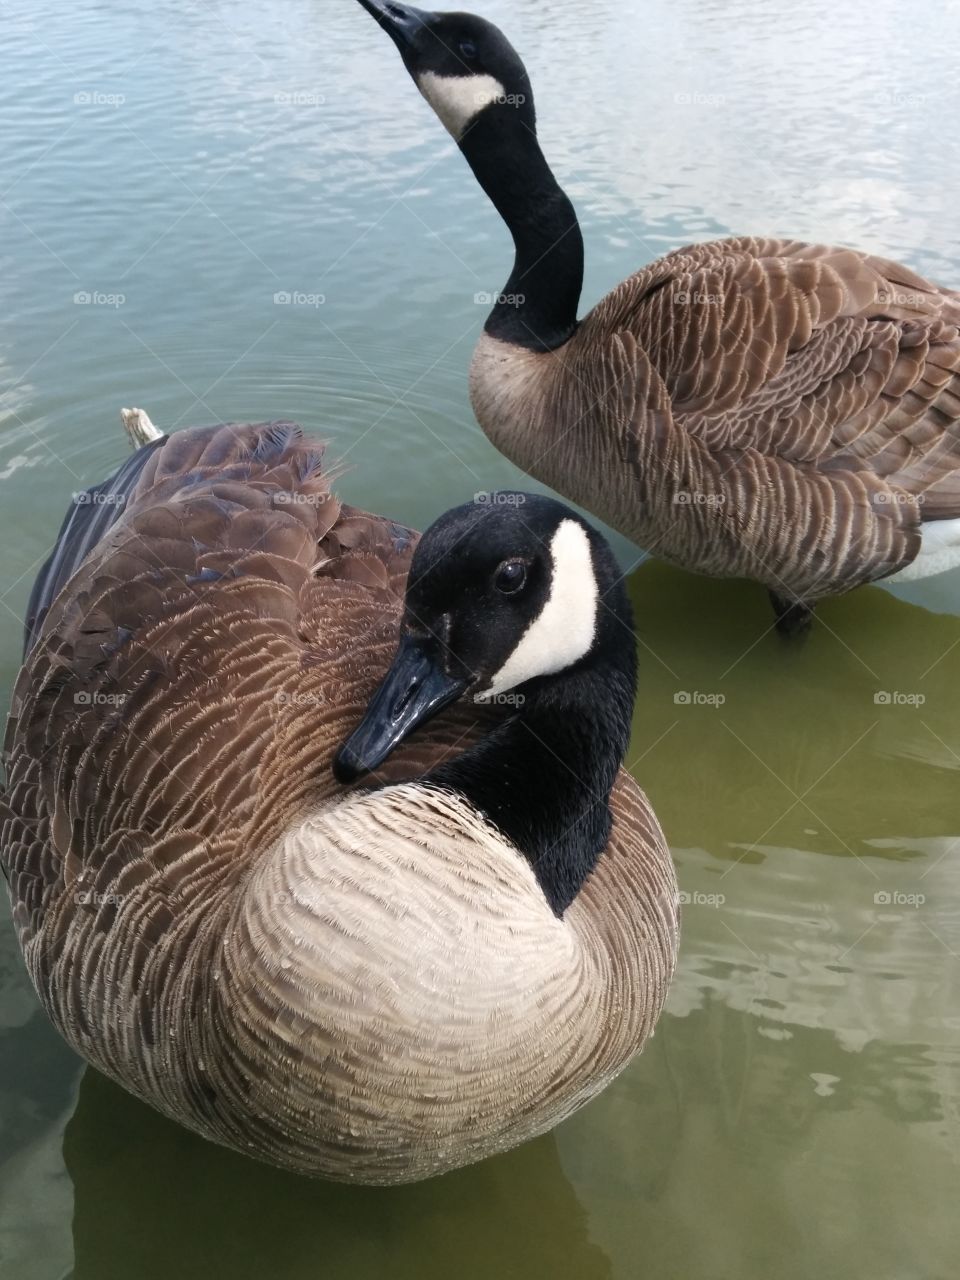 Goose posing for the camera. Geese came to say hi